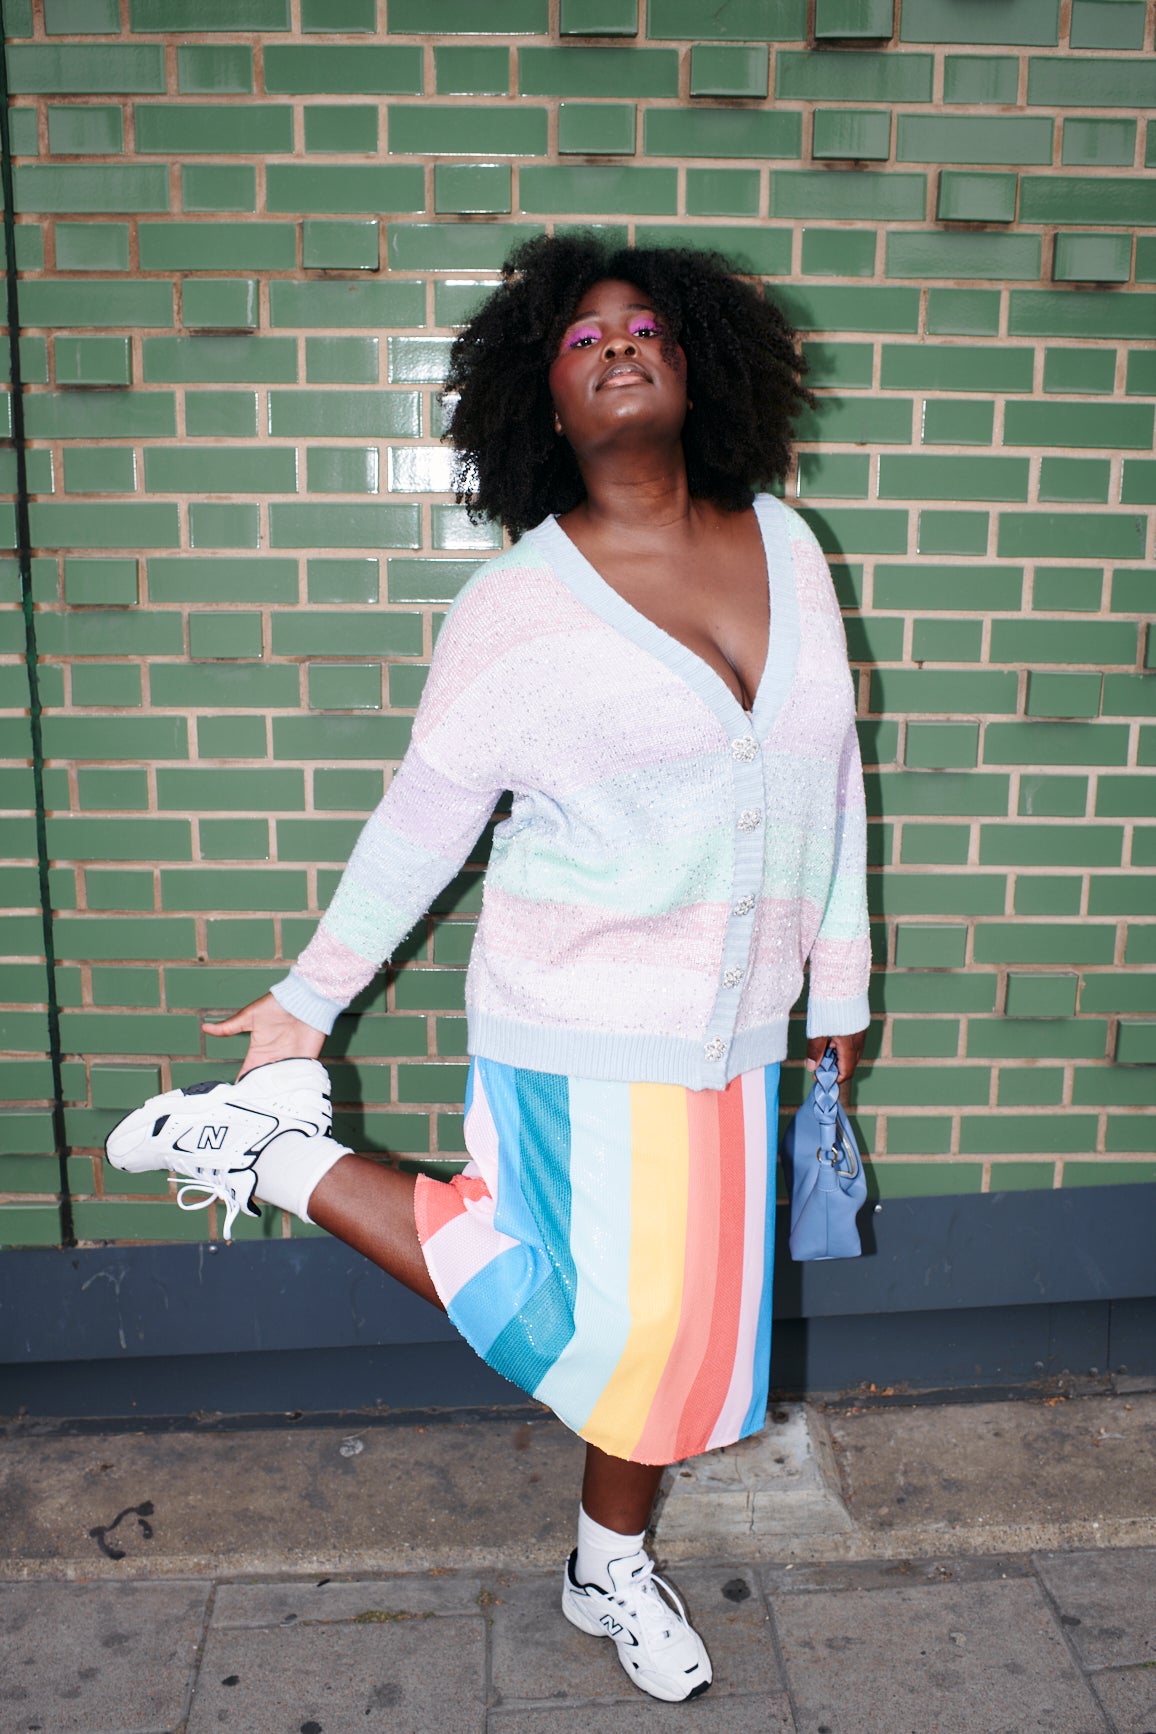 Took Some Sequin Multicolor Stripe Skirt Photos for the Blog